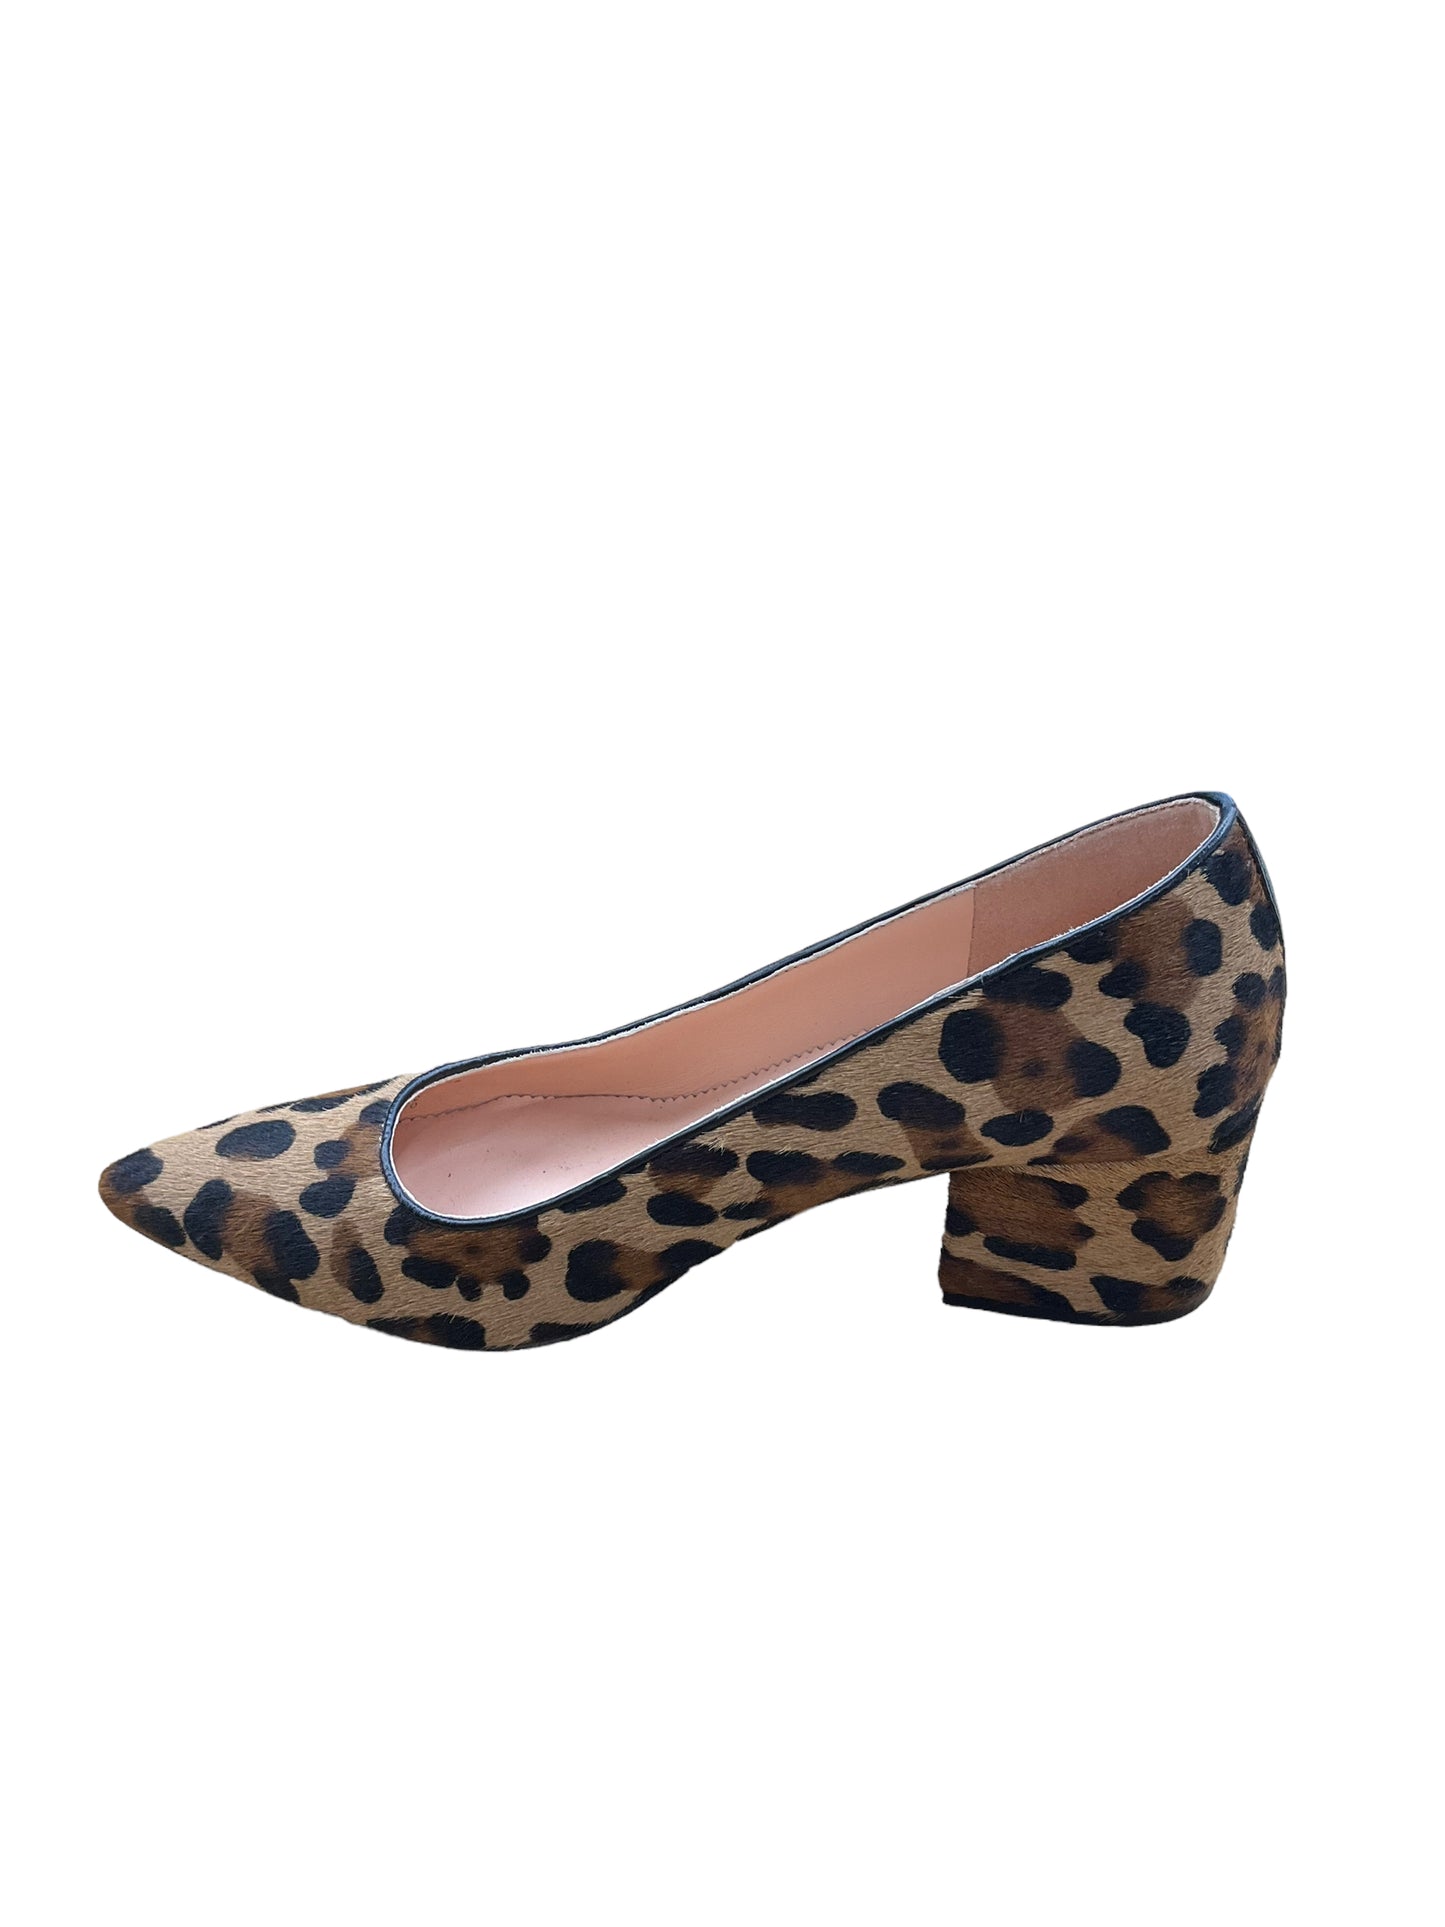 Shoes Heels Block By J Crew O  Size: 6